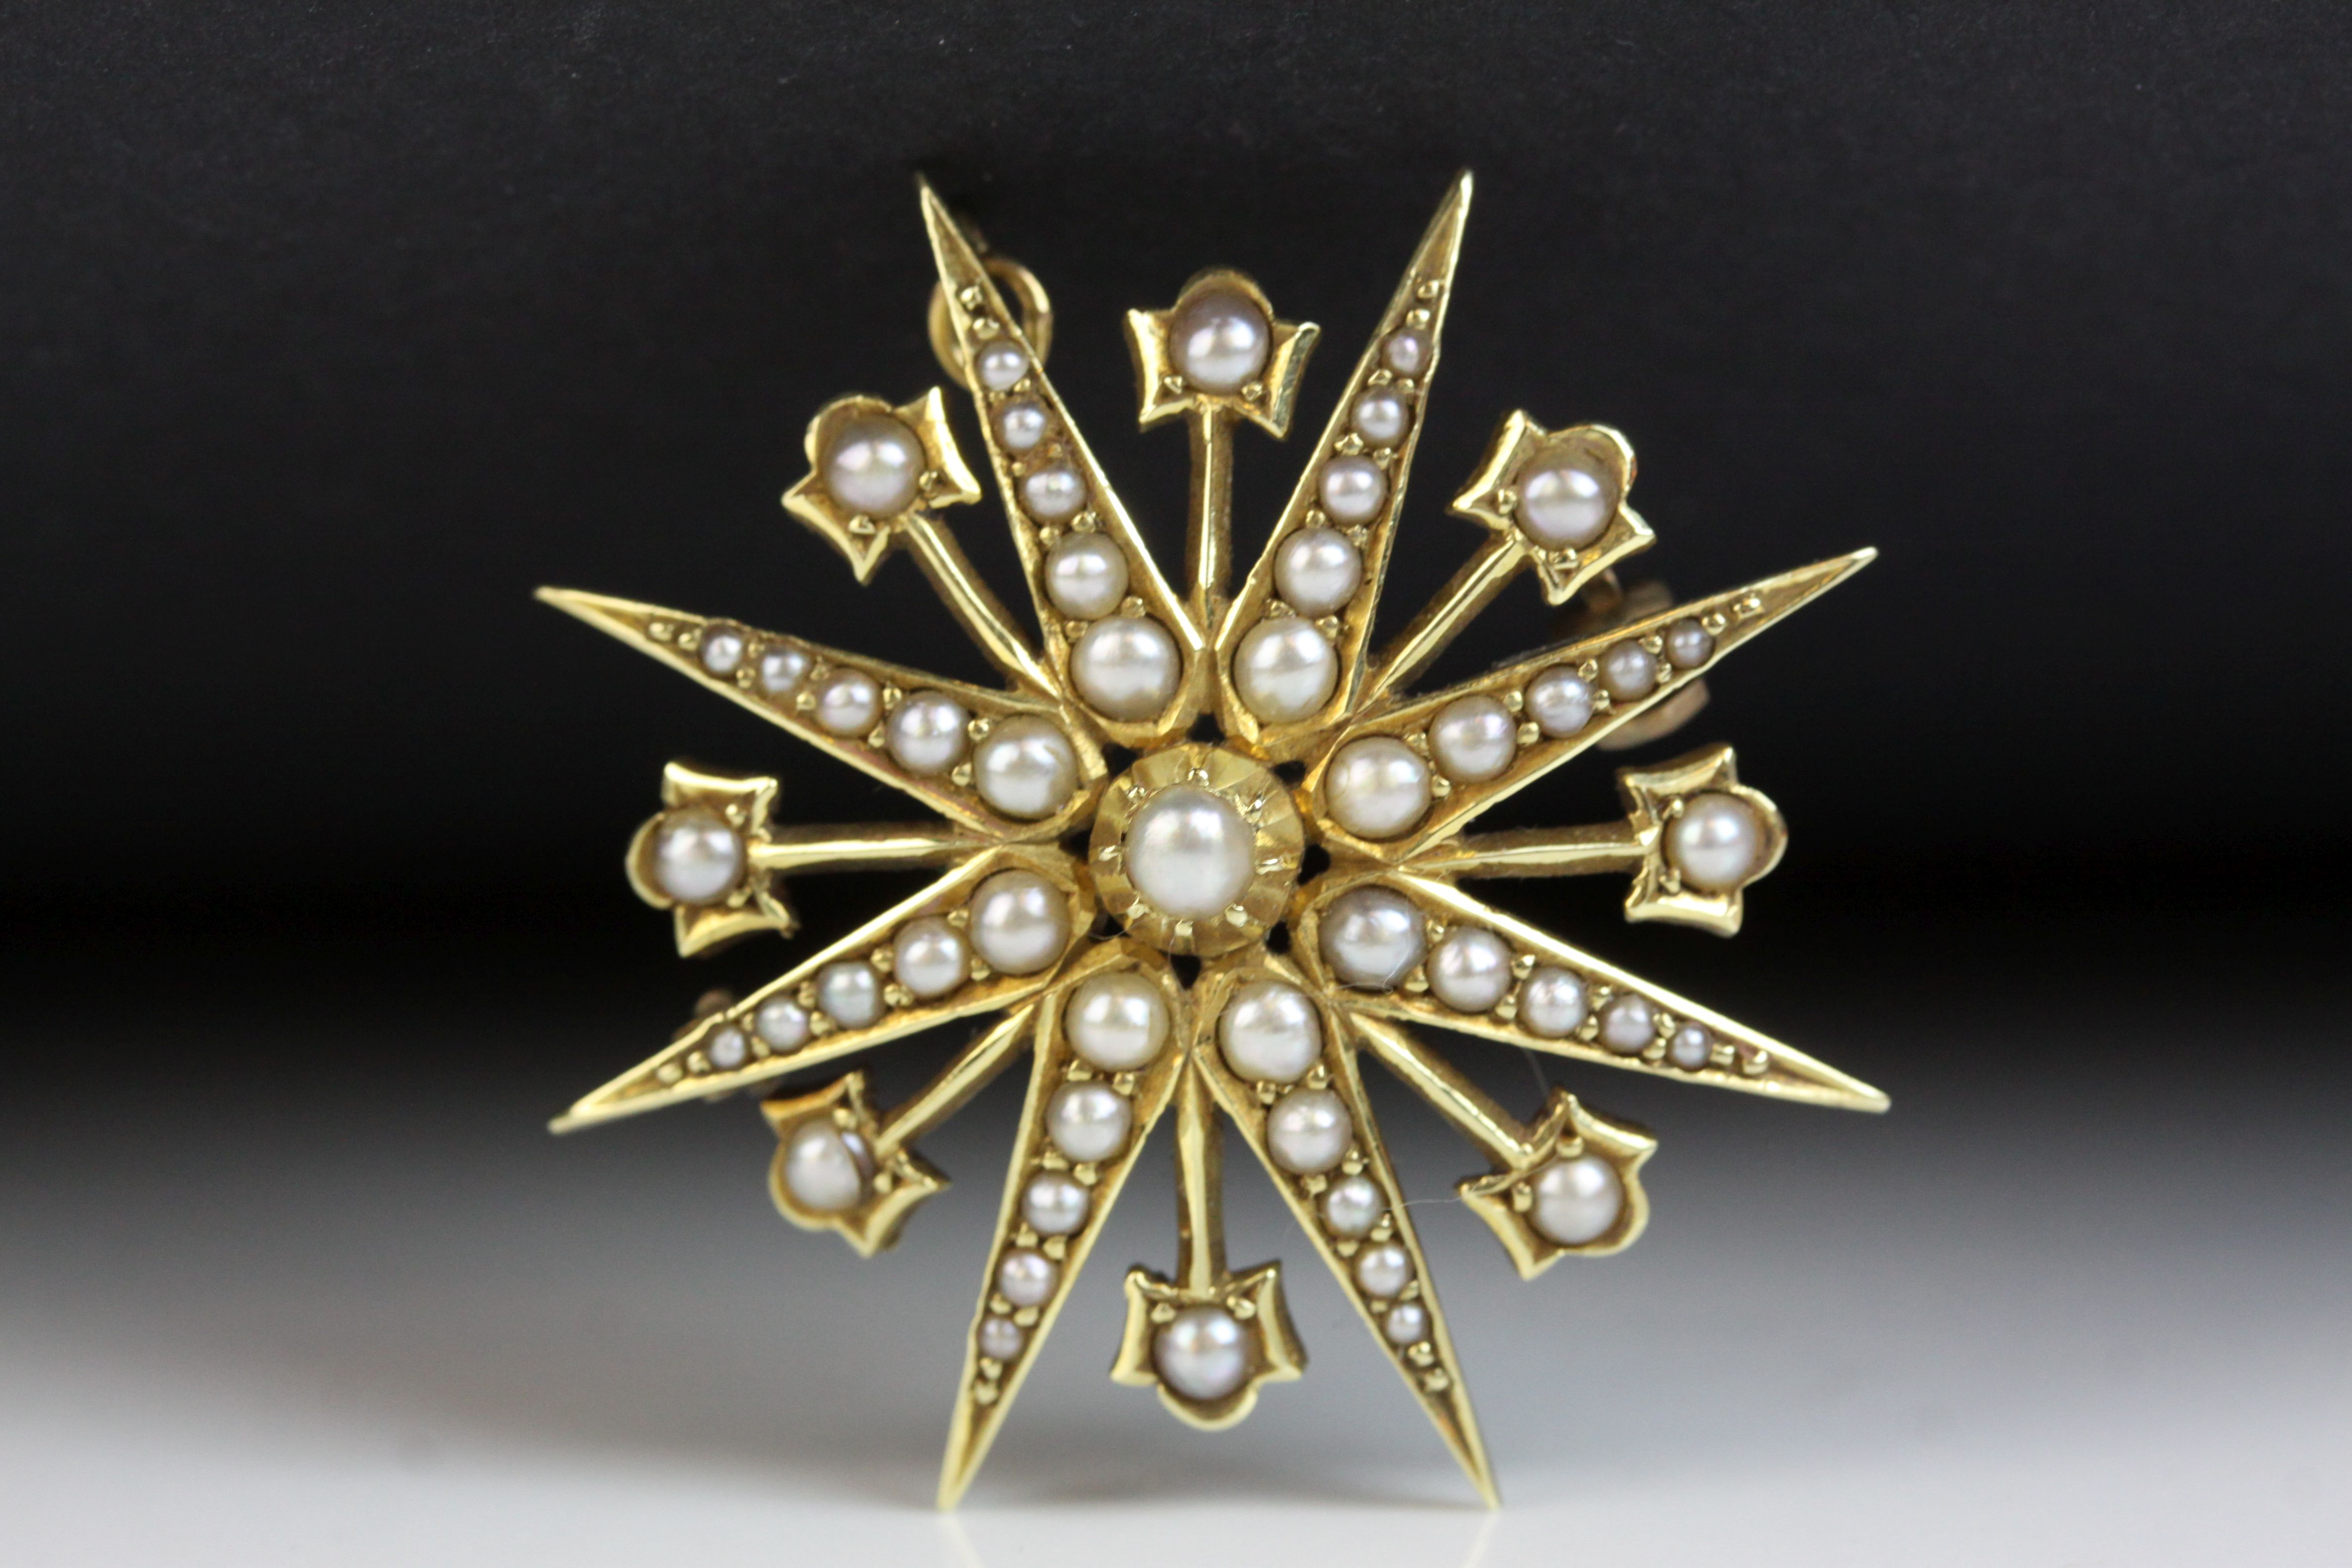 Edwardian seed pearl 15ct yellow gold pendant brooch, eight pronged star full set with graduated